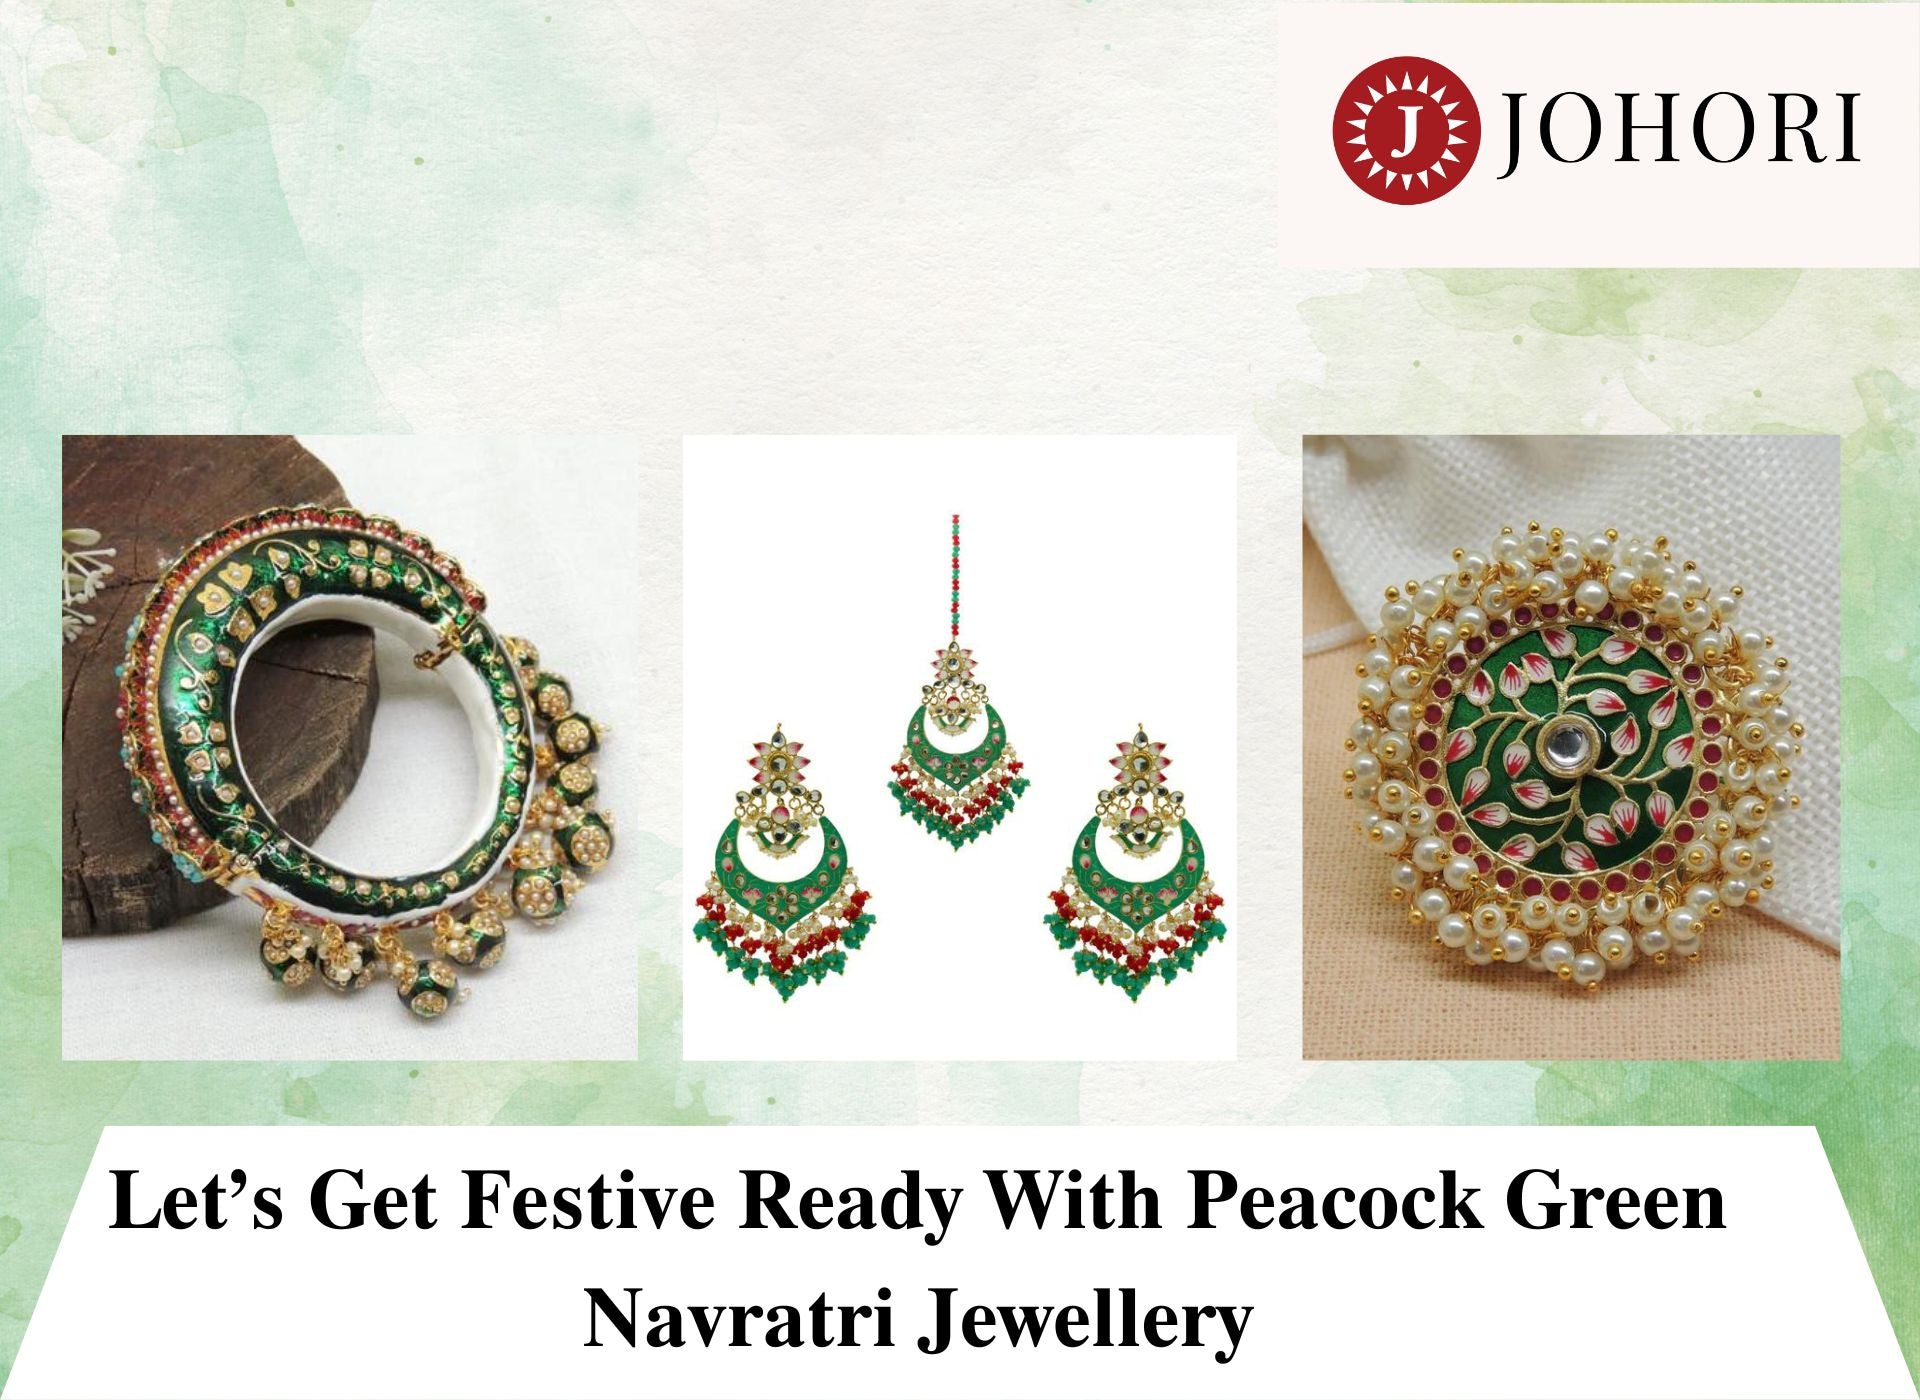 Let’s Get Festive Ready With Peacock Green Navratri Jewellery